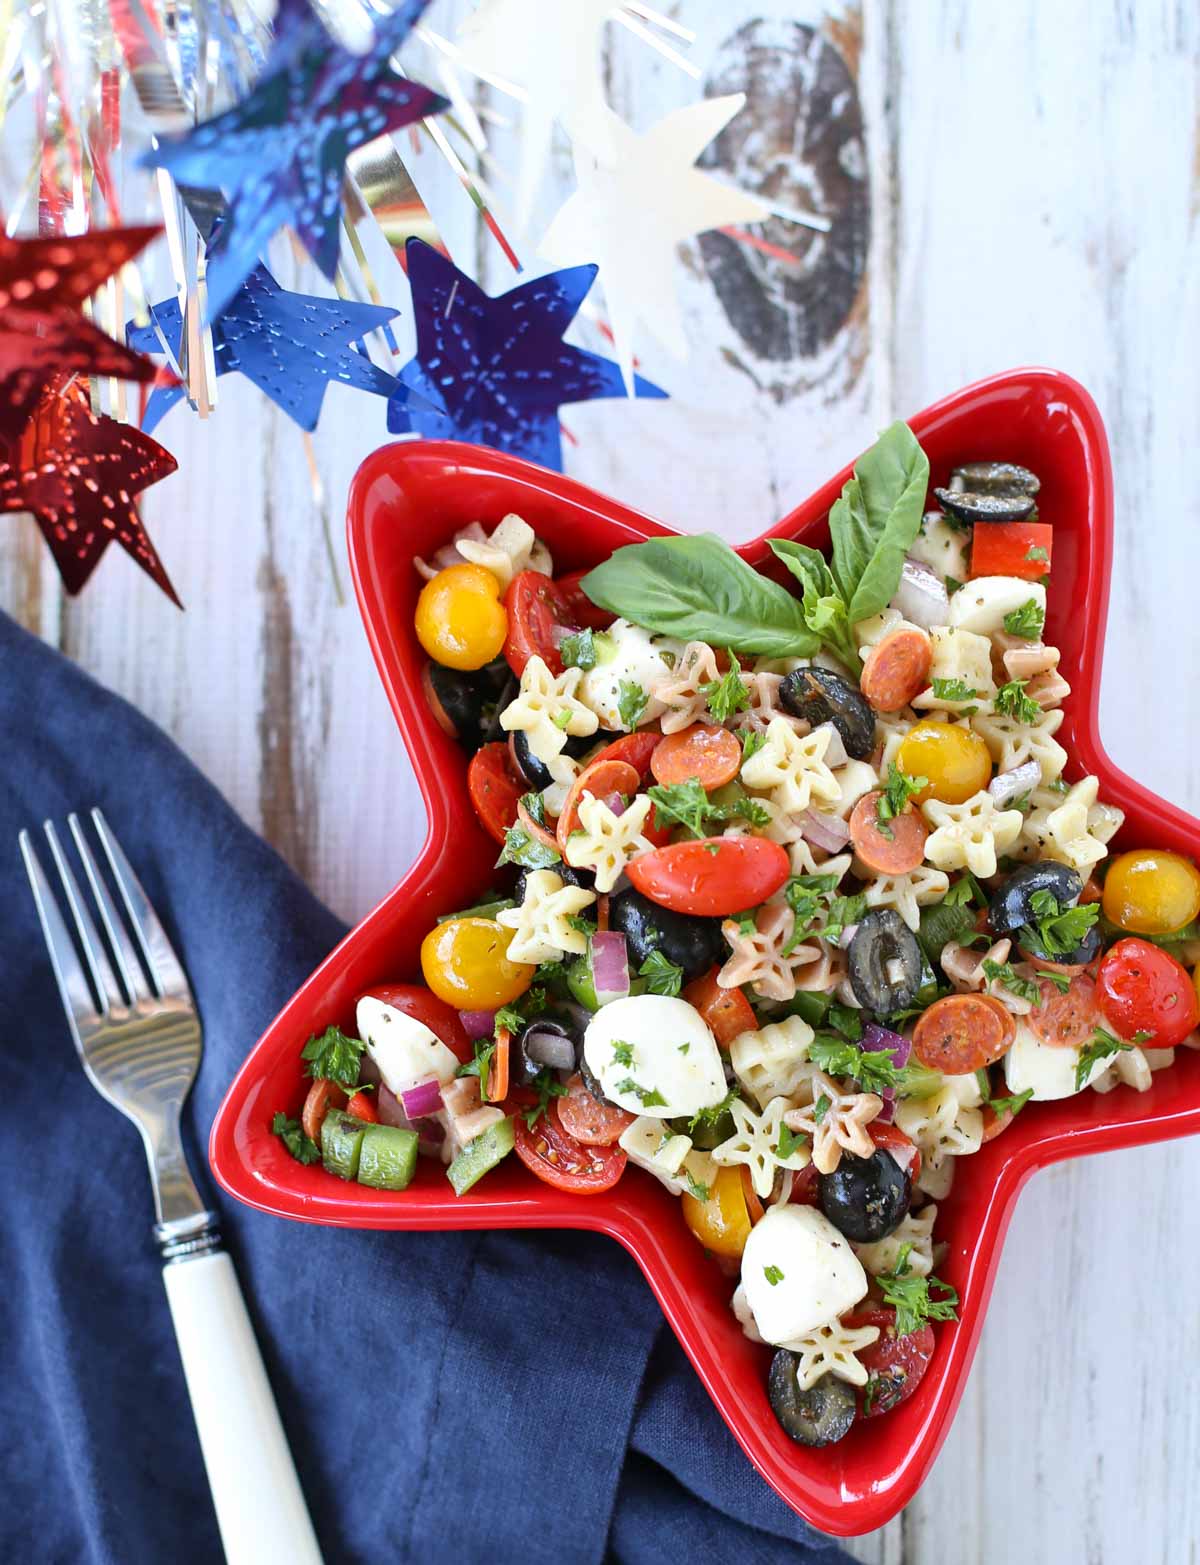 Supreme Pizza Pasta Salad | Delish combo of your favorite pizza ingredients! A simple side dish to any summer menu. Yum! The vinaigrette dressing ties it all together! | WorldofPastabilities.com